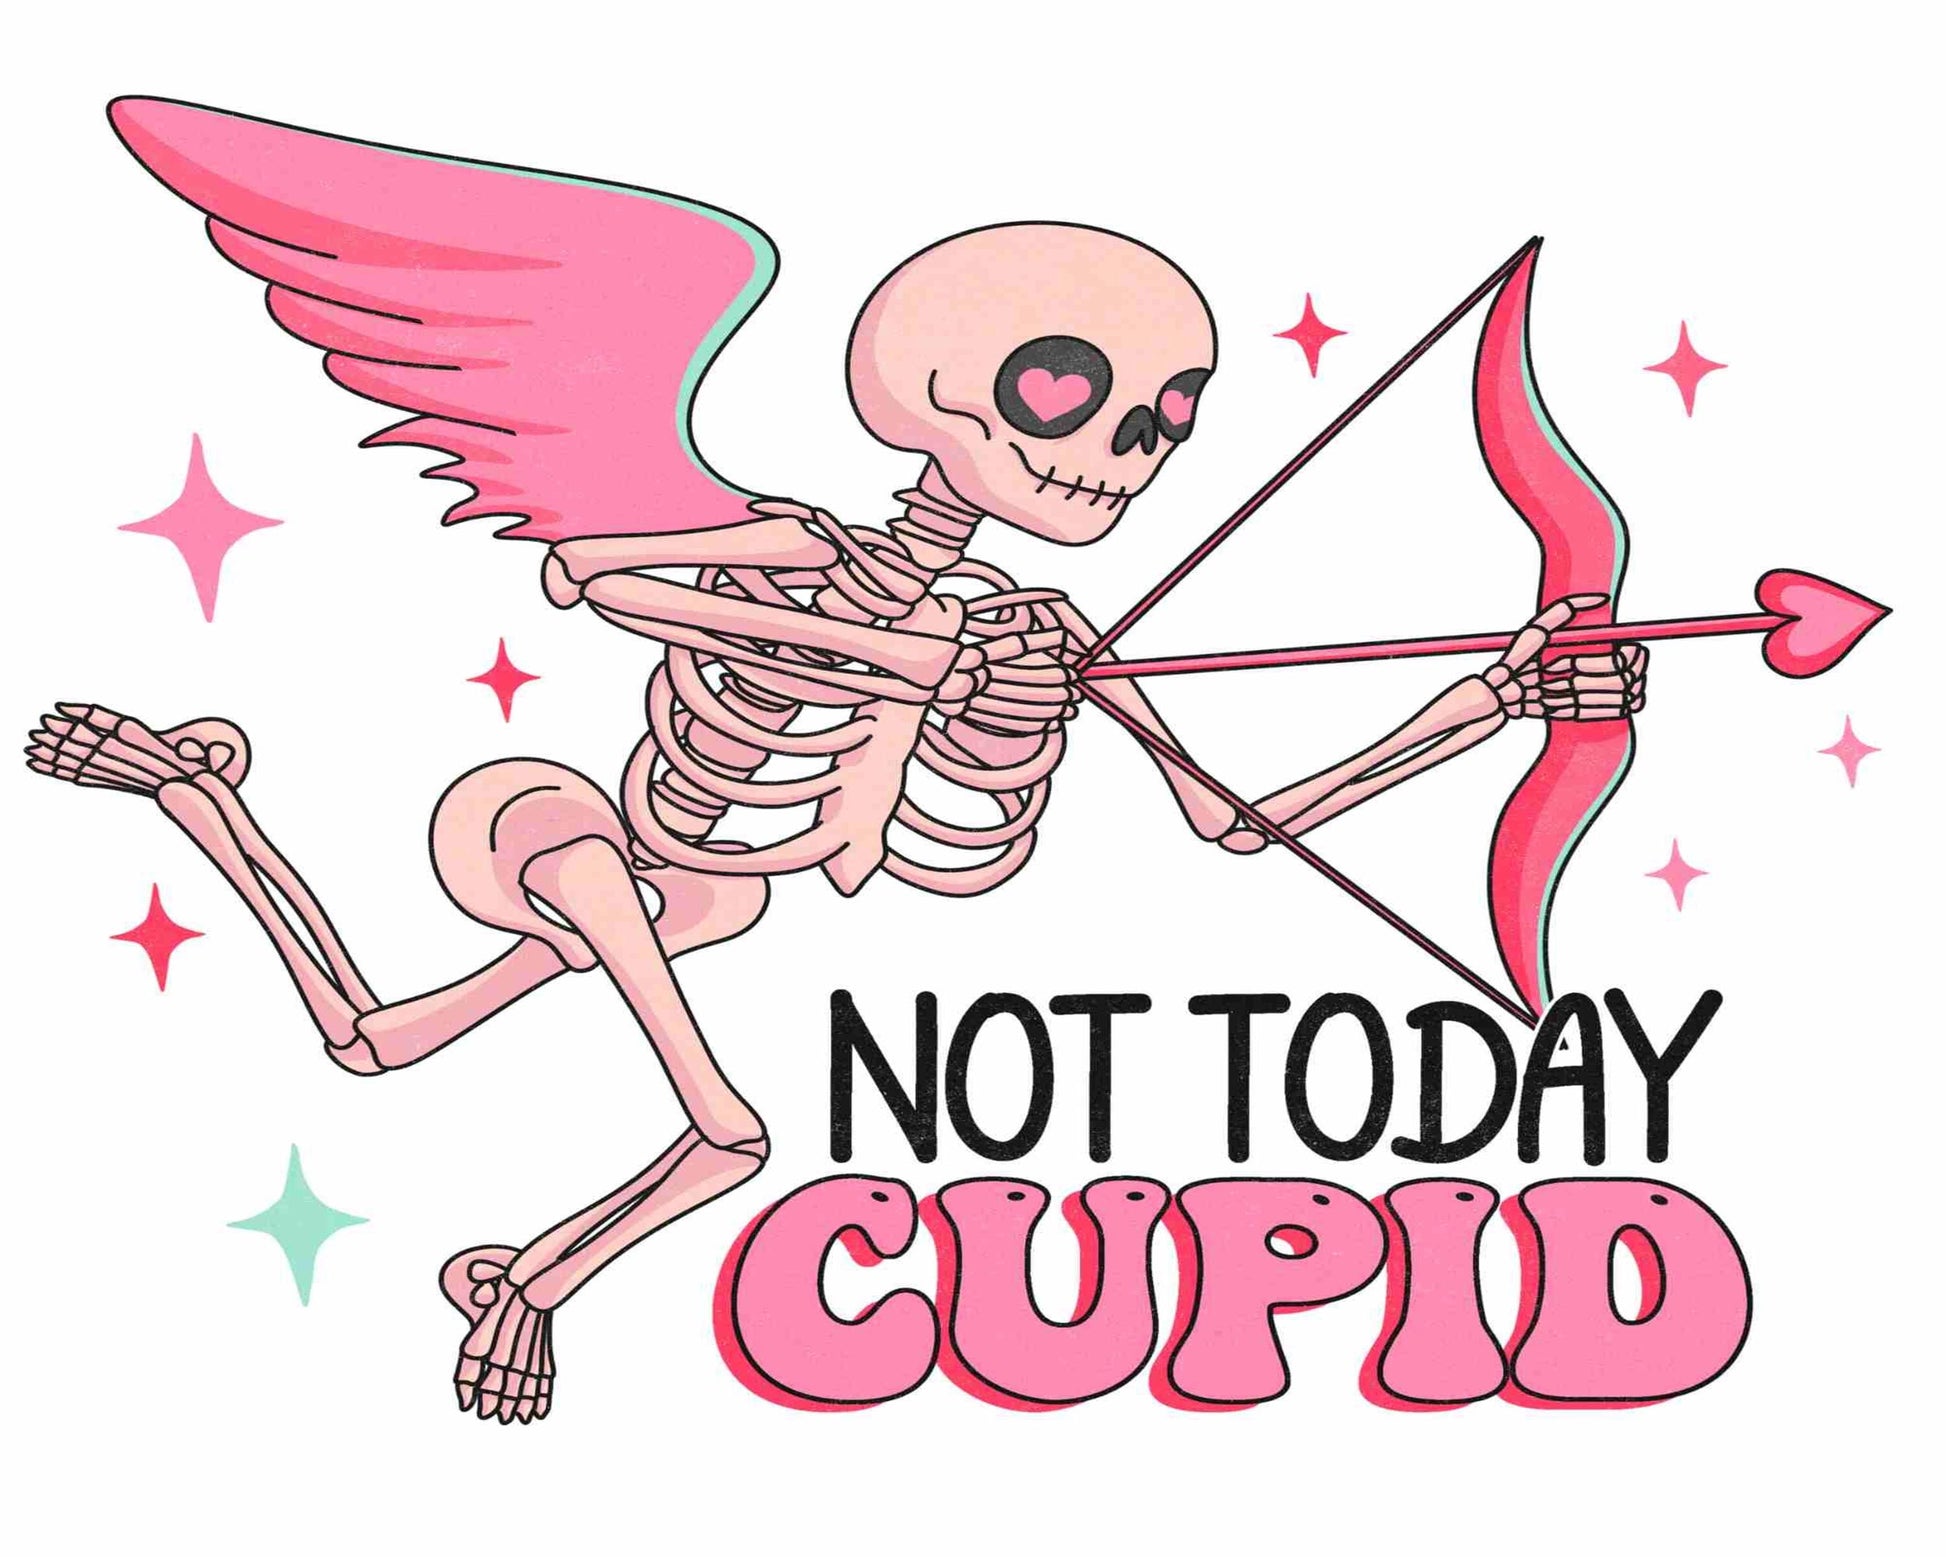 Brazil Valentines Day PNG Transparent, Cupid Archery Brazil Valentines Day,  Cupid, Brazil Valentine S Day, Cute Cartoon PNG Image For Free Download